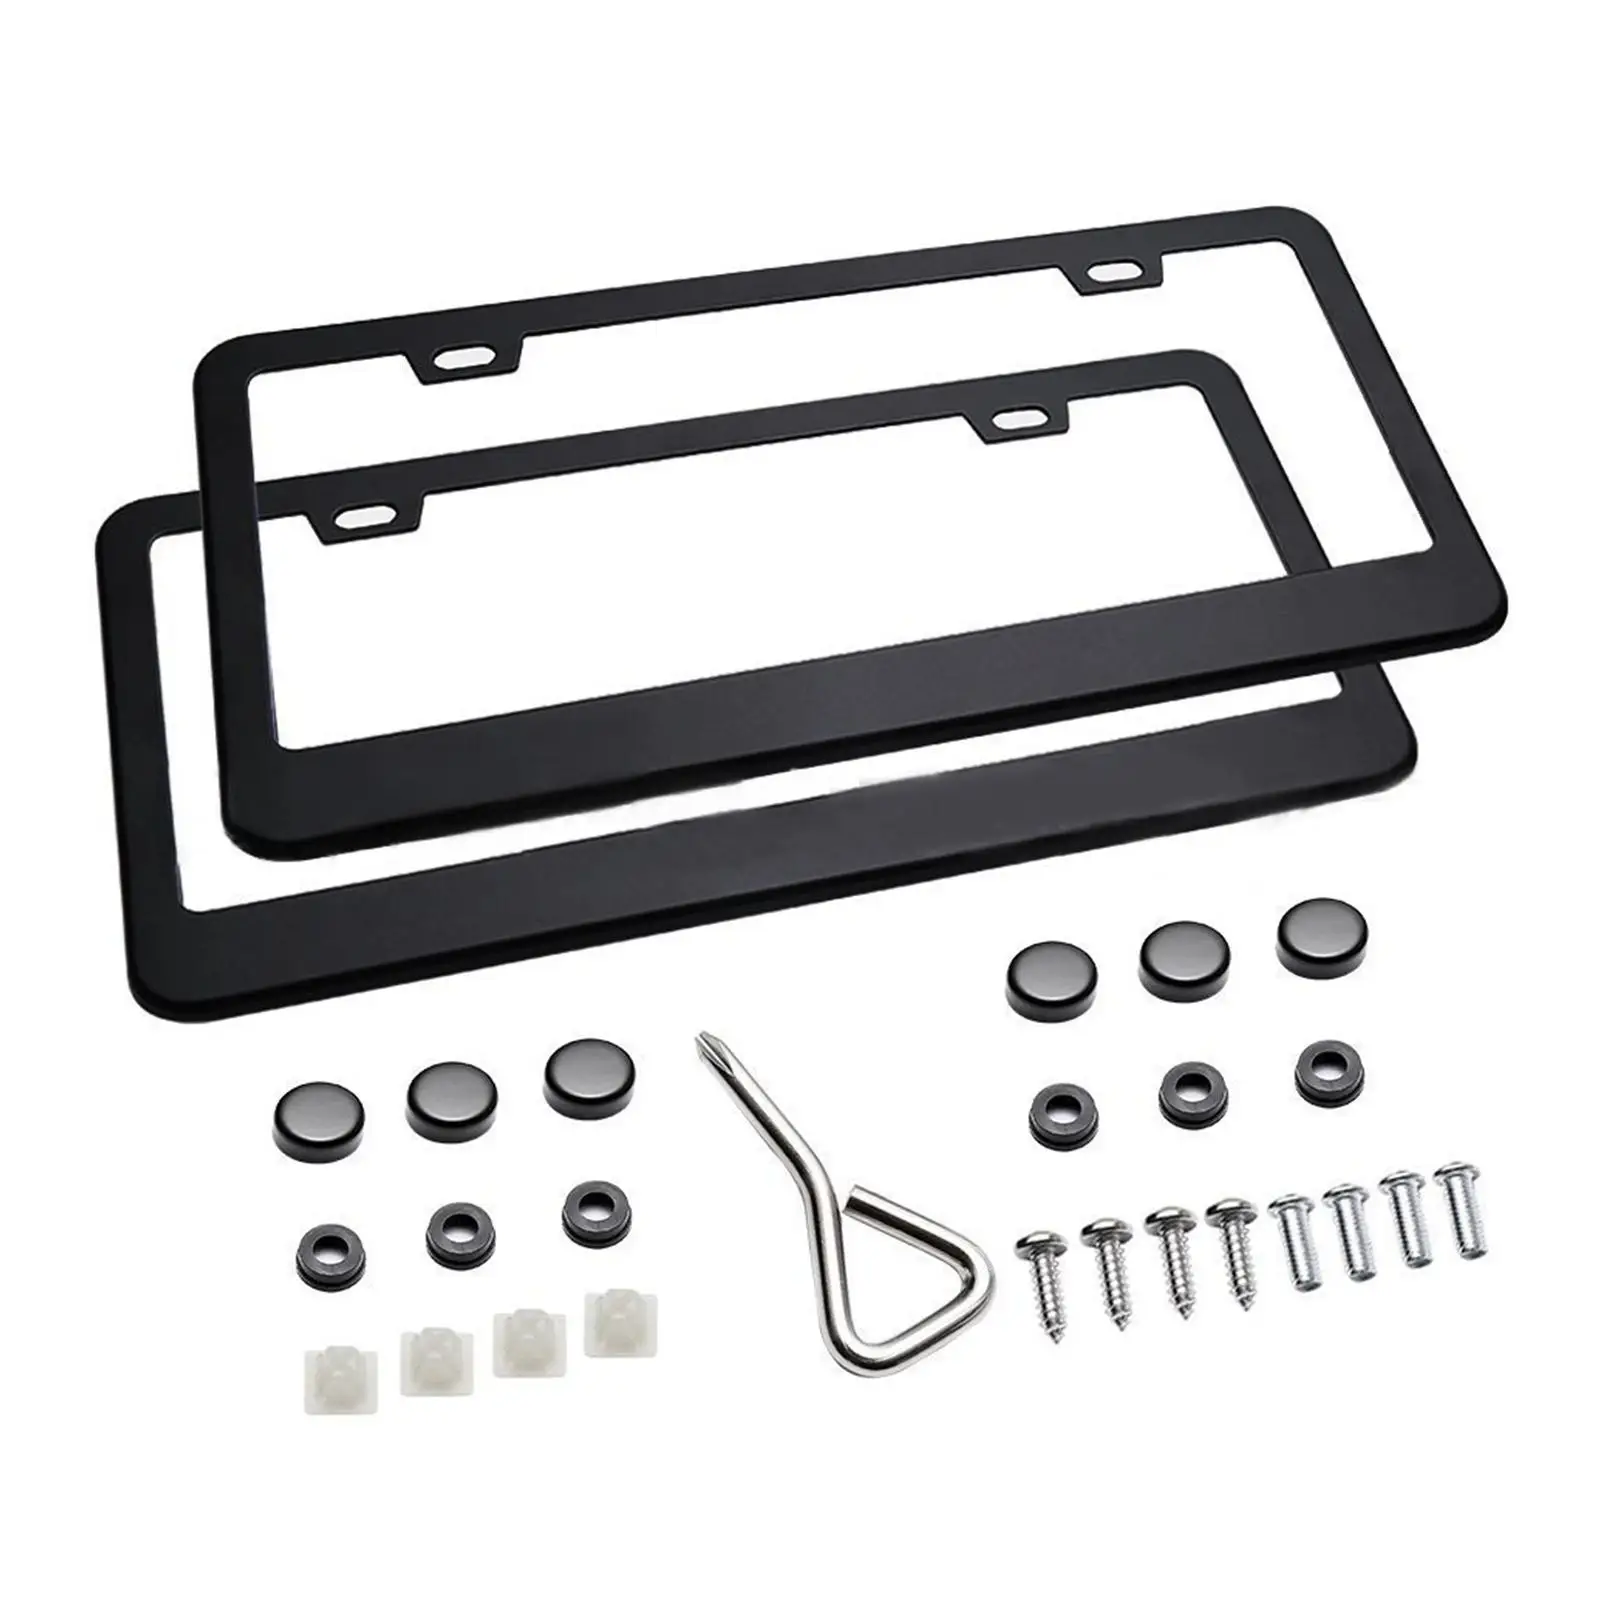 2Pcs Car License Plate Frame High Quality Auto Accessories with Fixing Screws License Plate Bracket for US Standard Plates